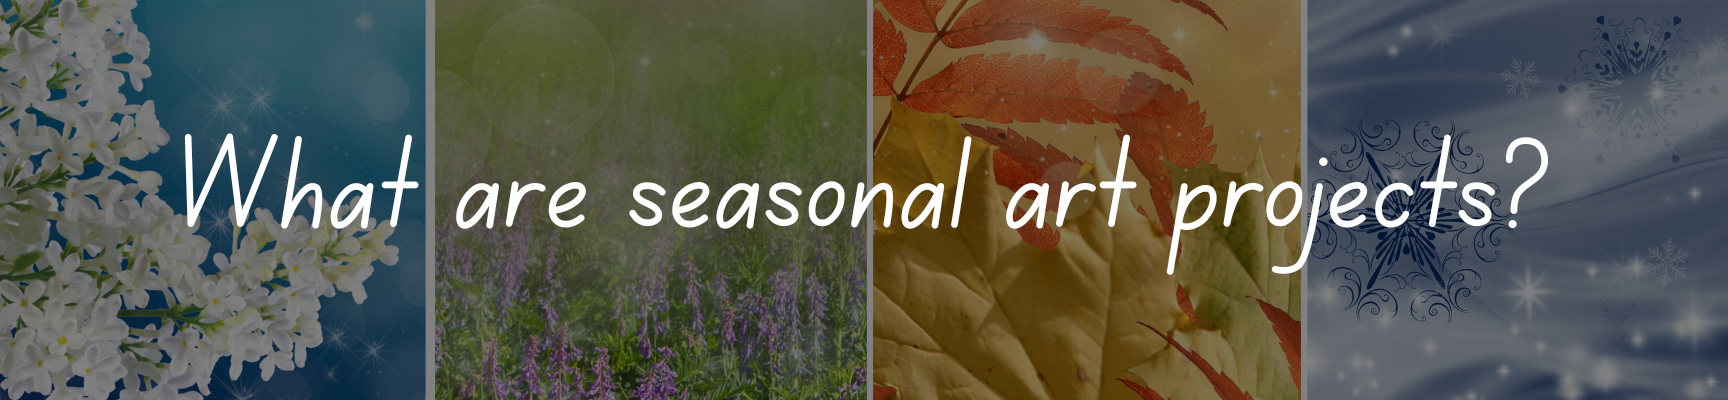 What are seasonal art projects?